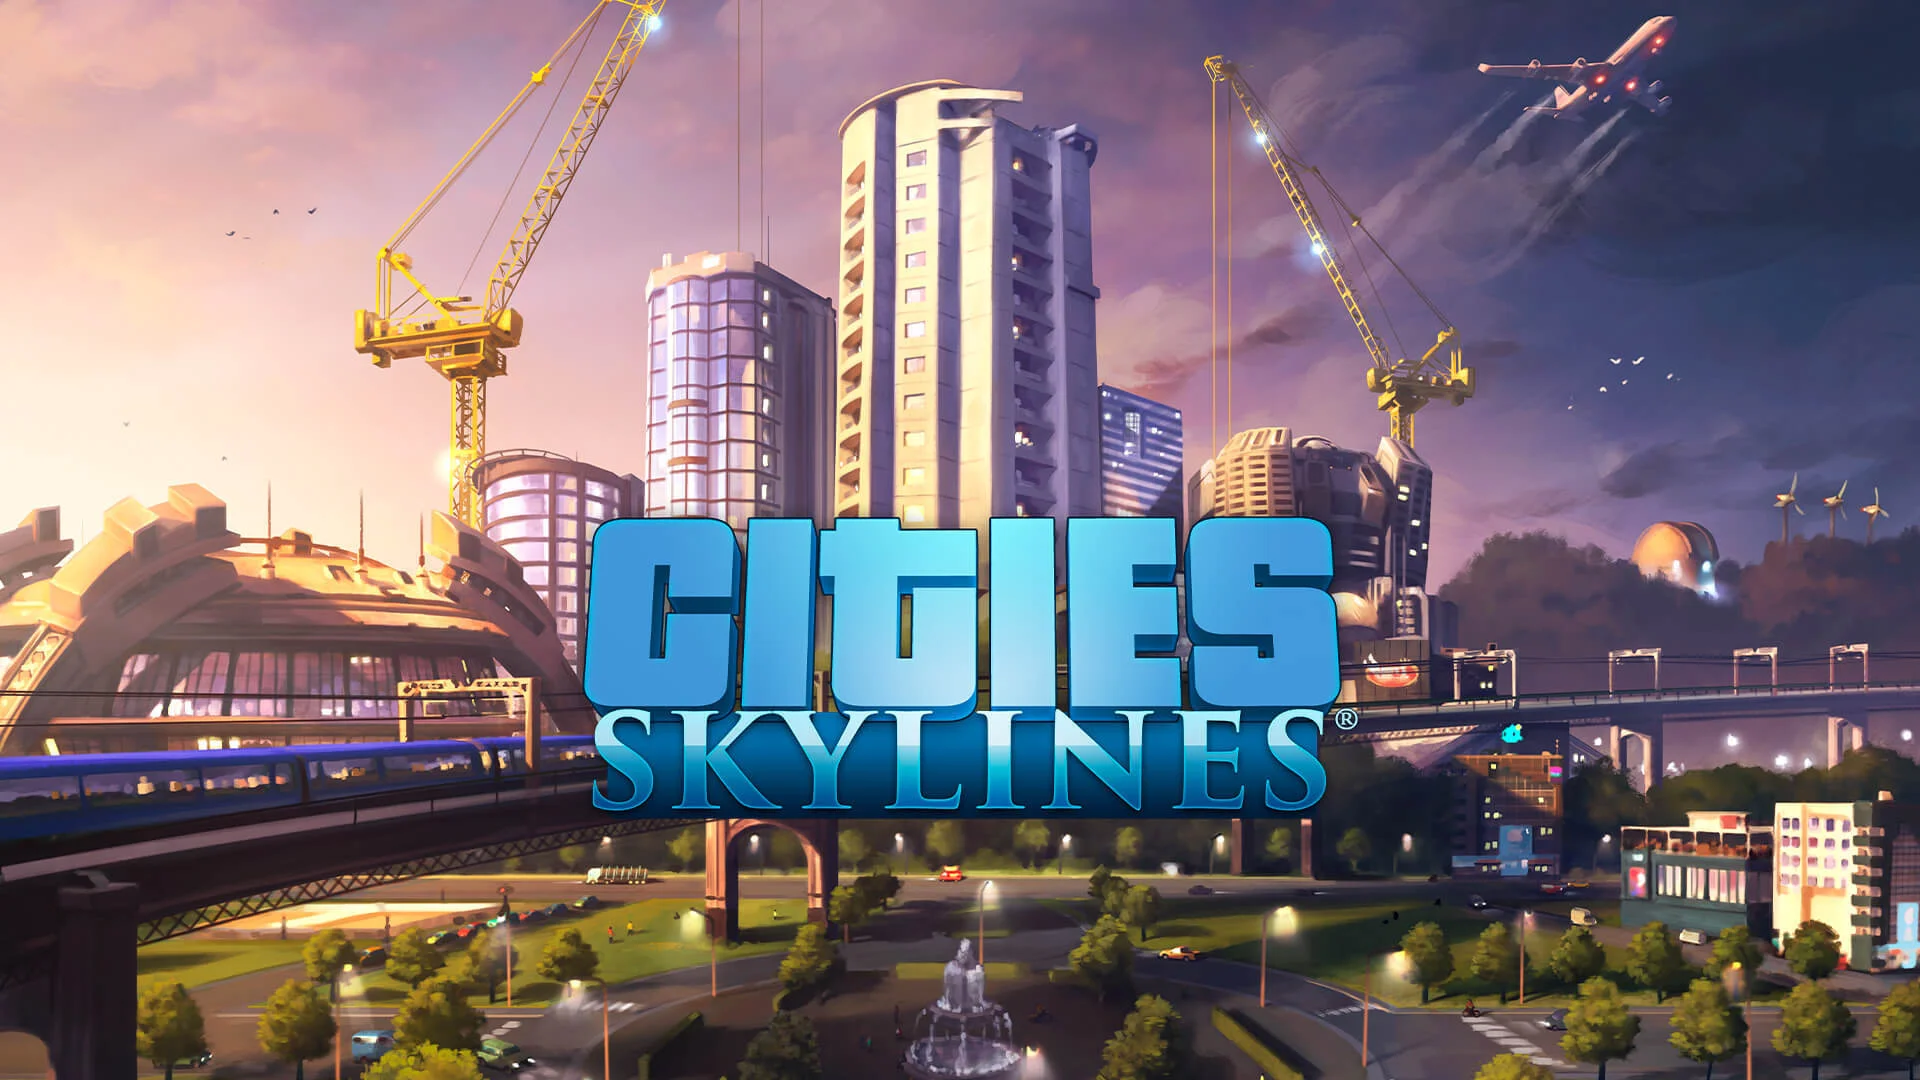 Cities: Skylines sells over 1 million copies in its first month